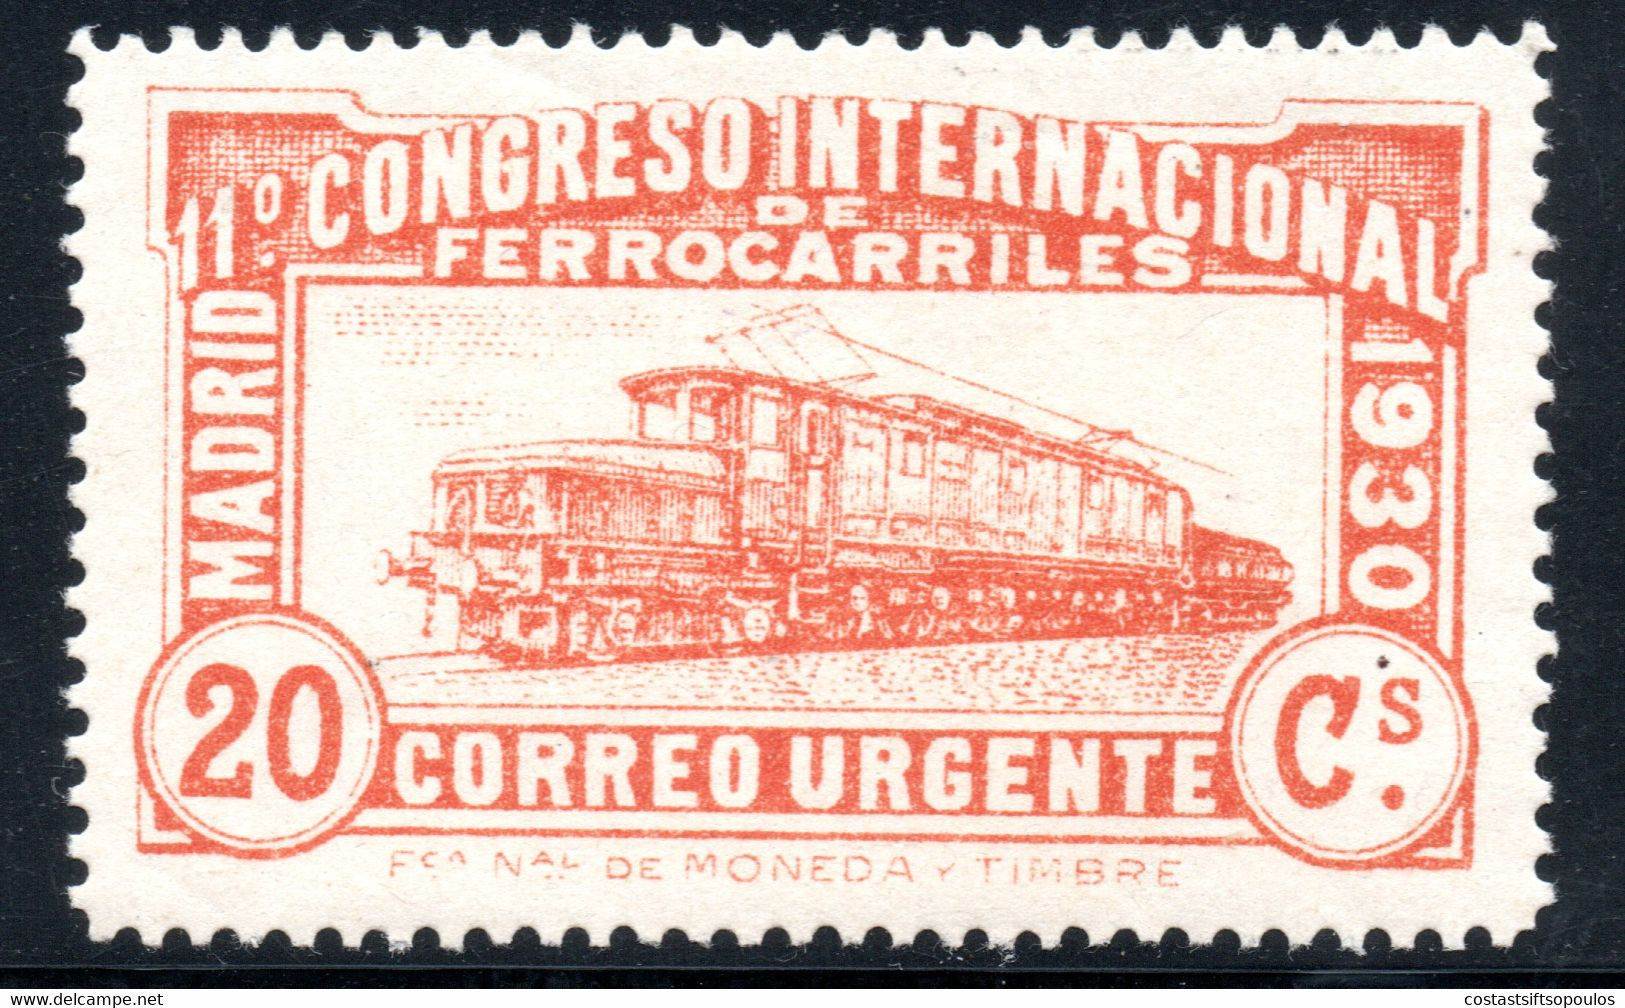 553.SPAIN.1930 RAILWAY CONGRESS.#482,SC.E6,MNH - Special Delivery